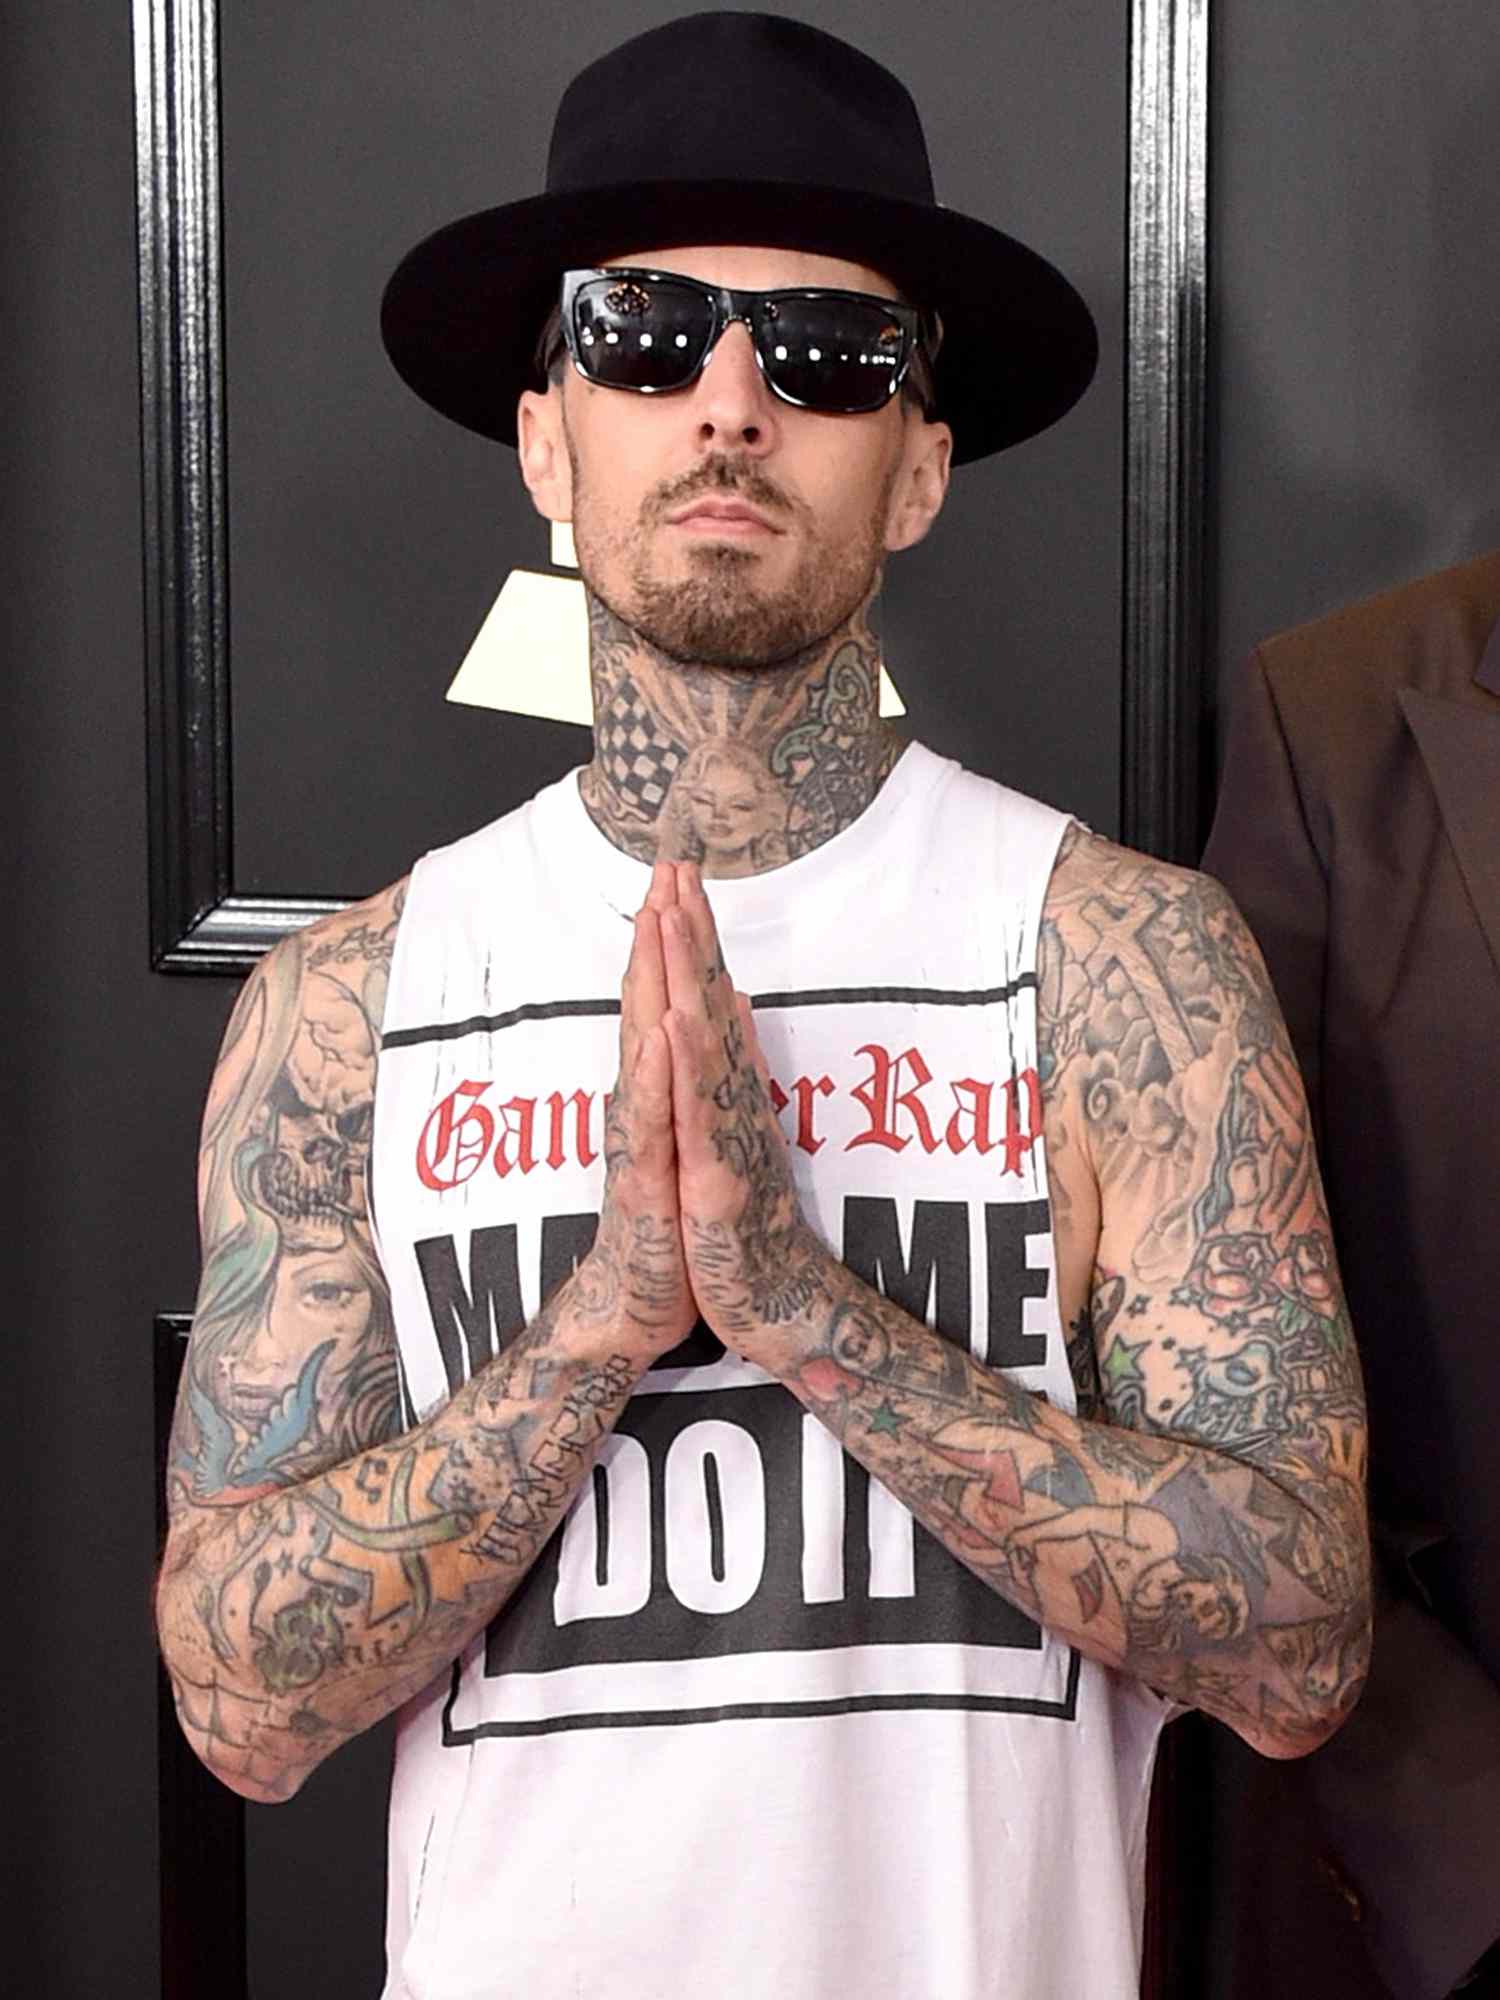 Fans of travis barker can post stories, video clips and photos of travis ba...